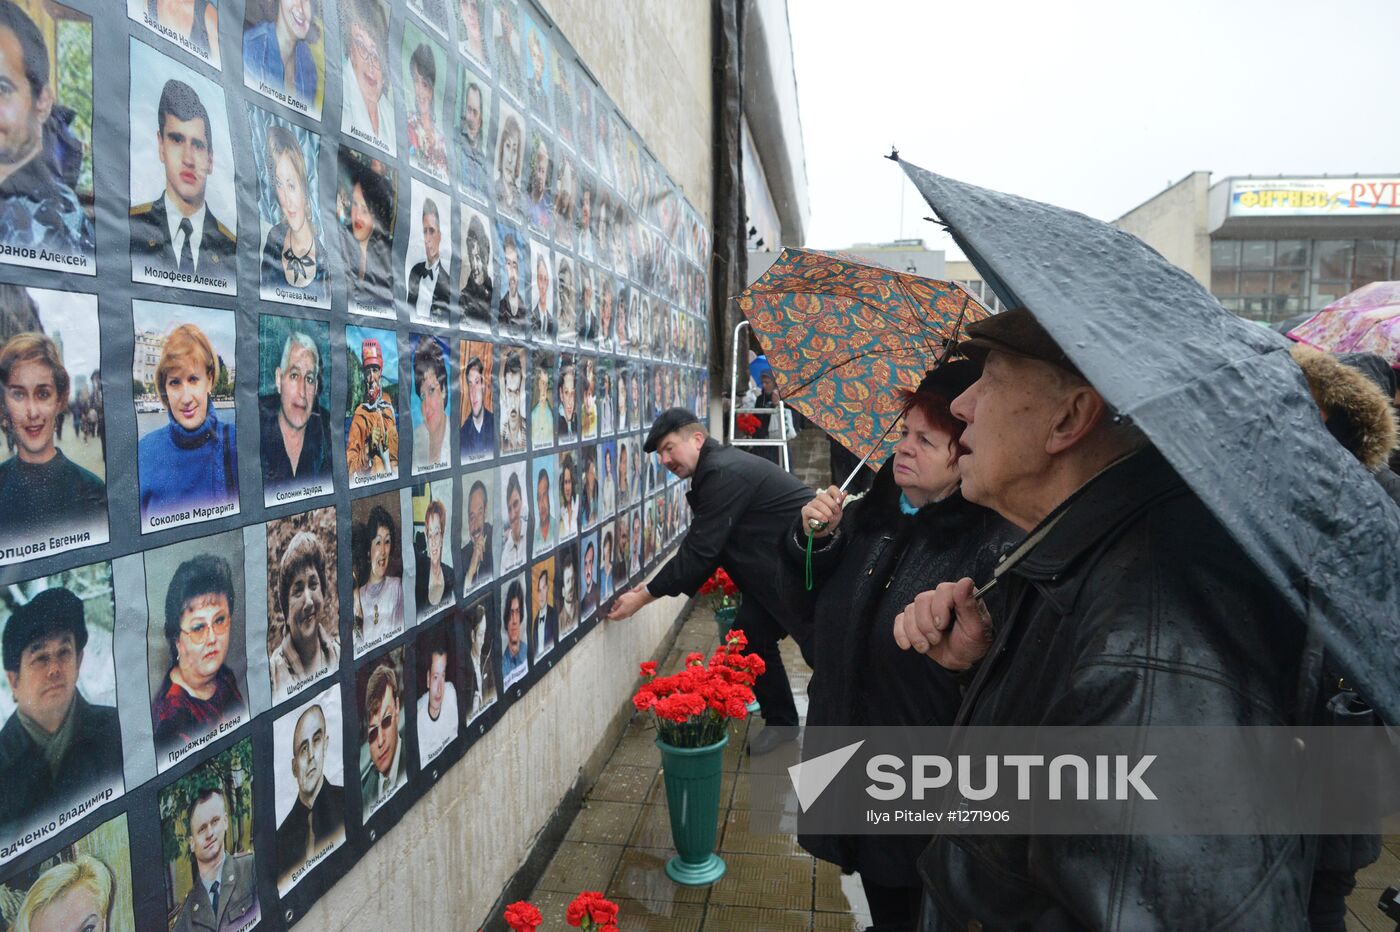 Memorial events for Nord-Ost siege victims